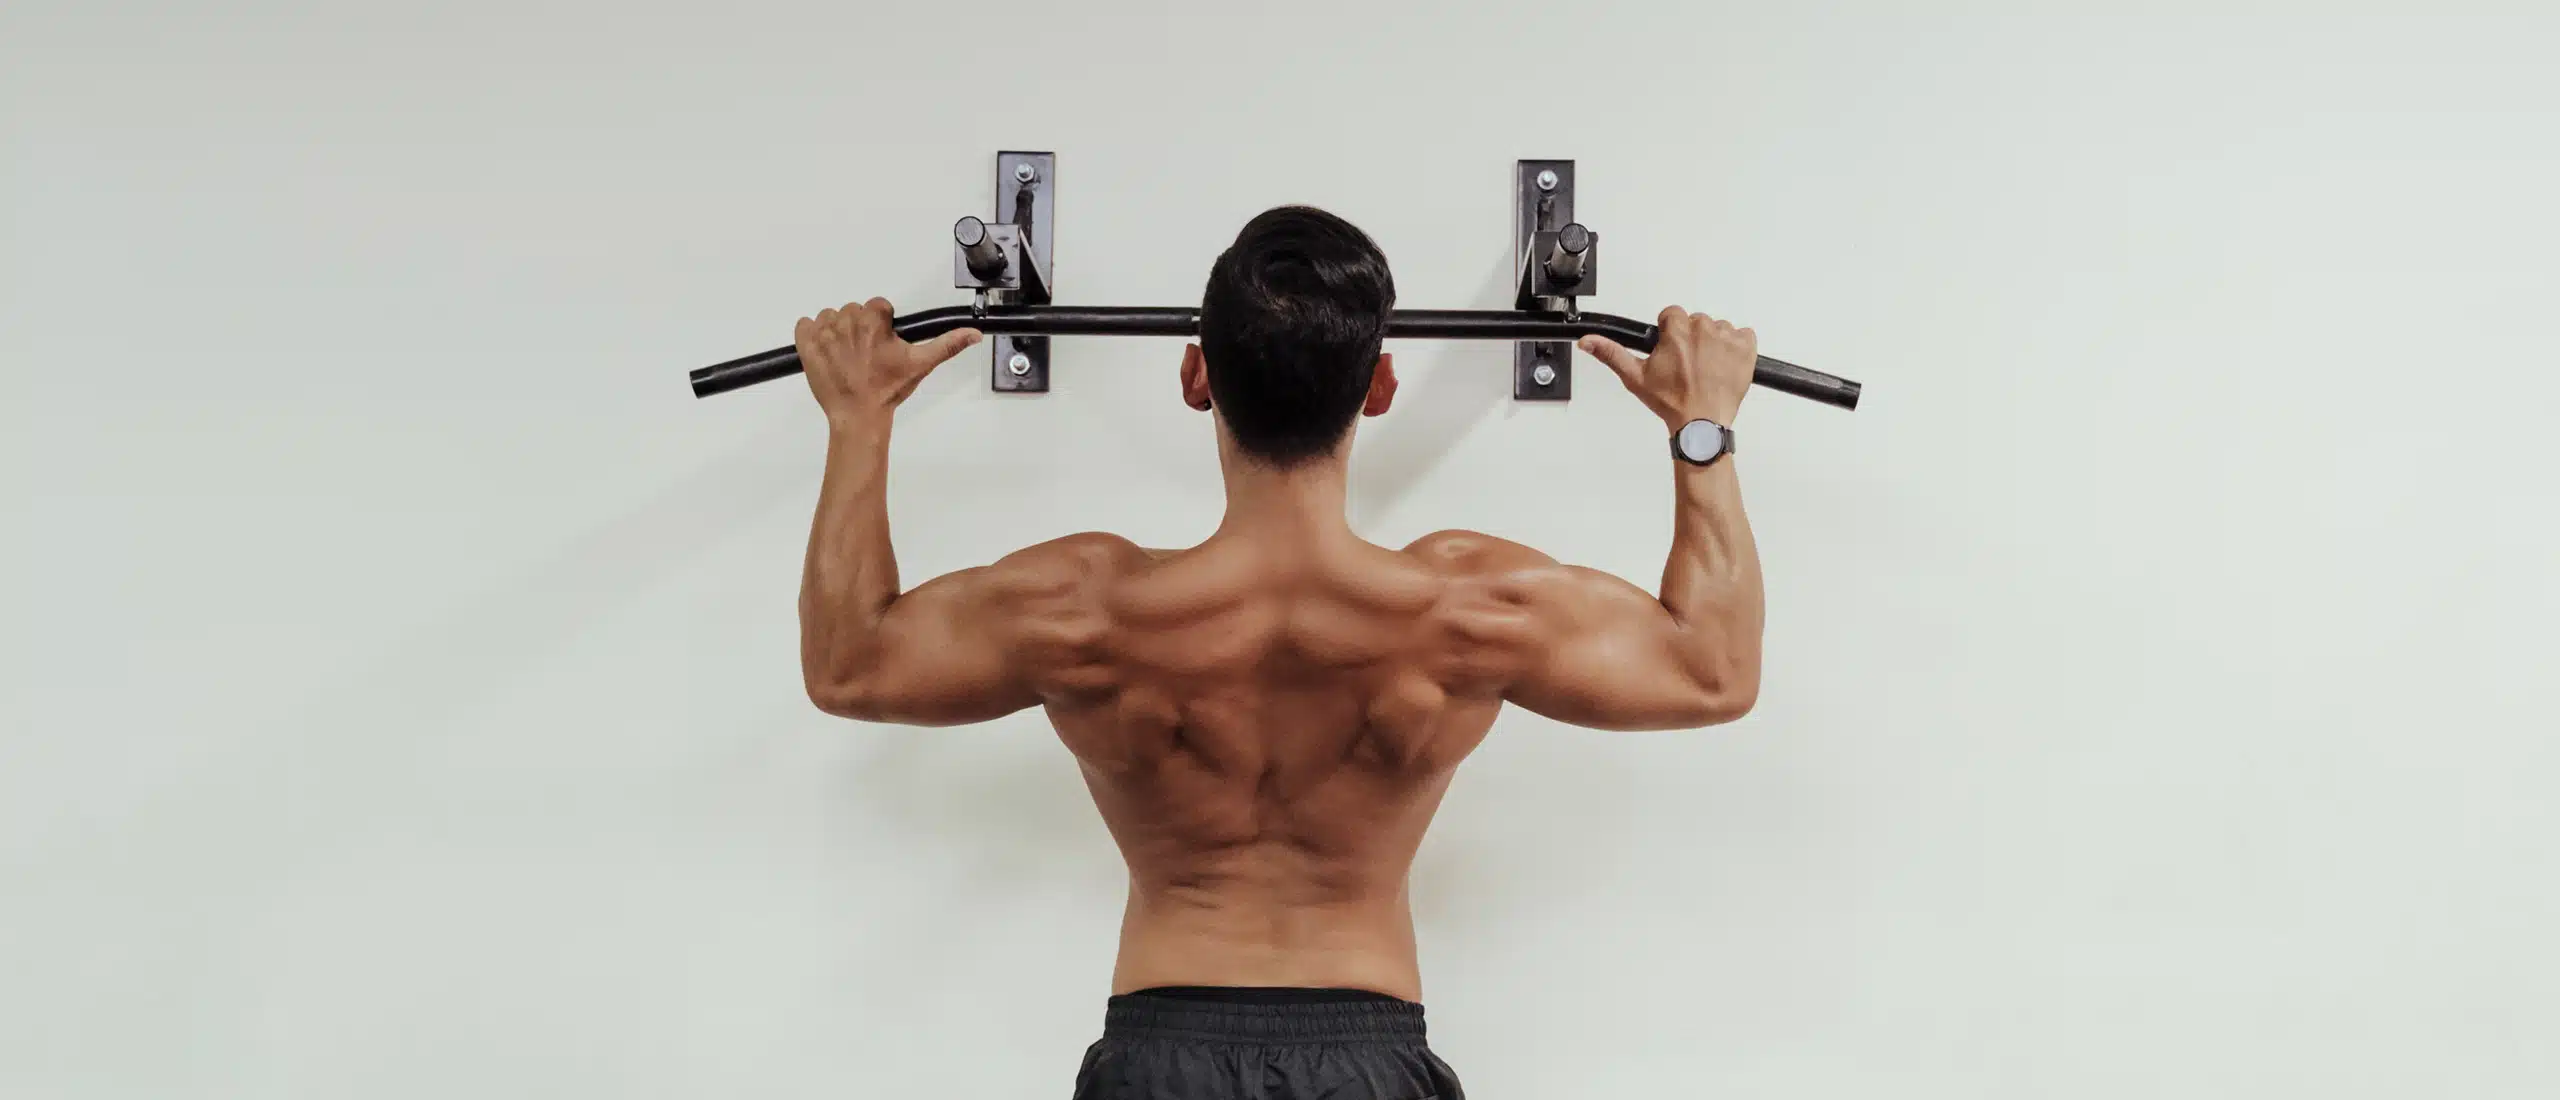 man does pull up on a mounted pull up bar. his back muscles are defined